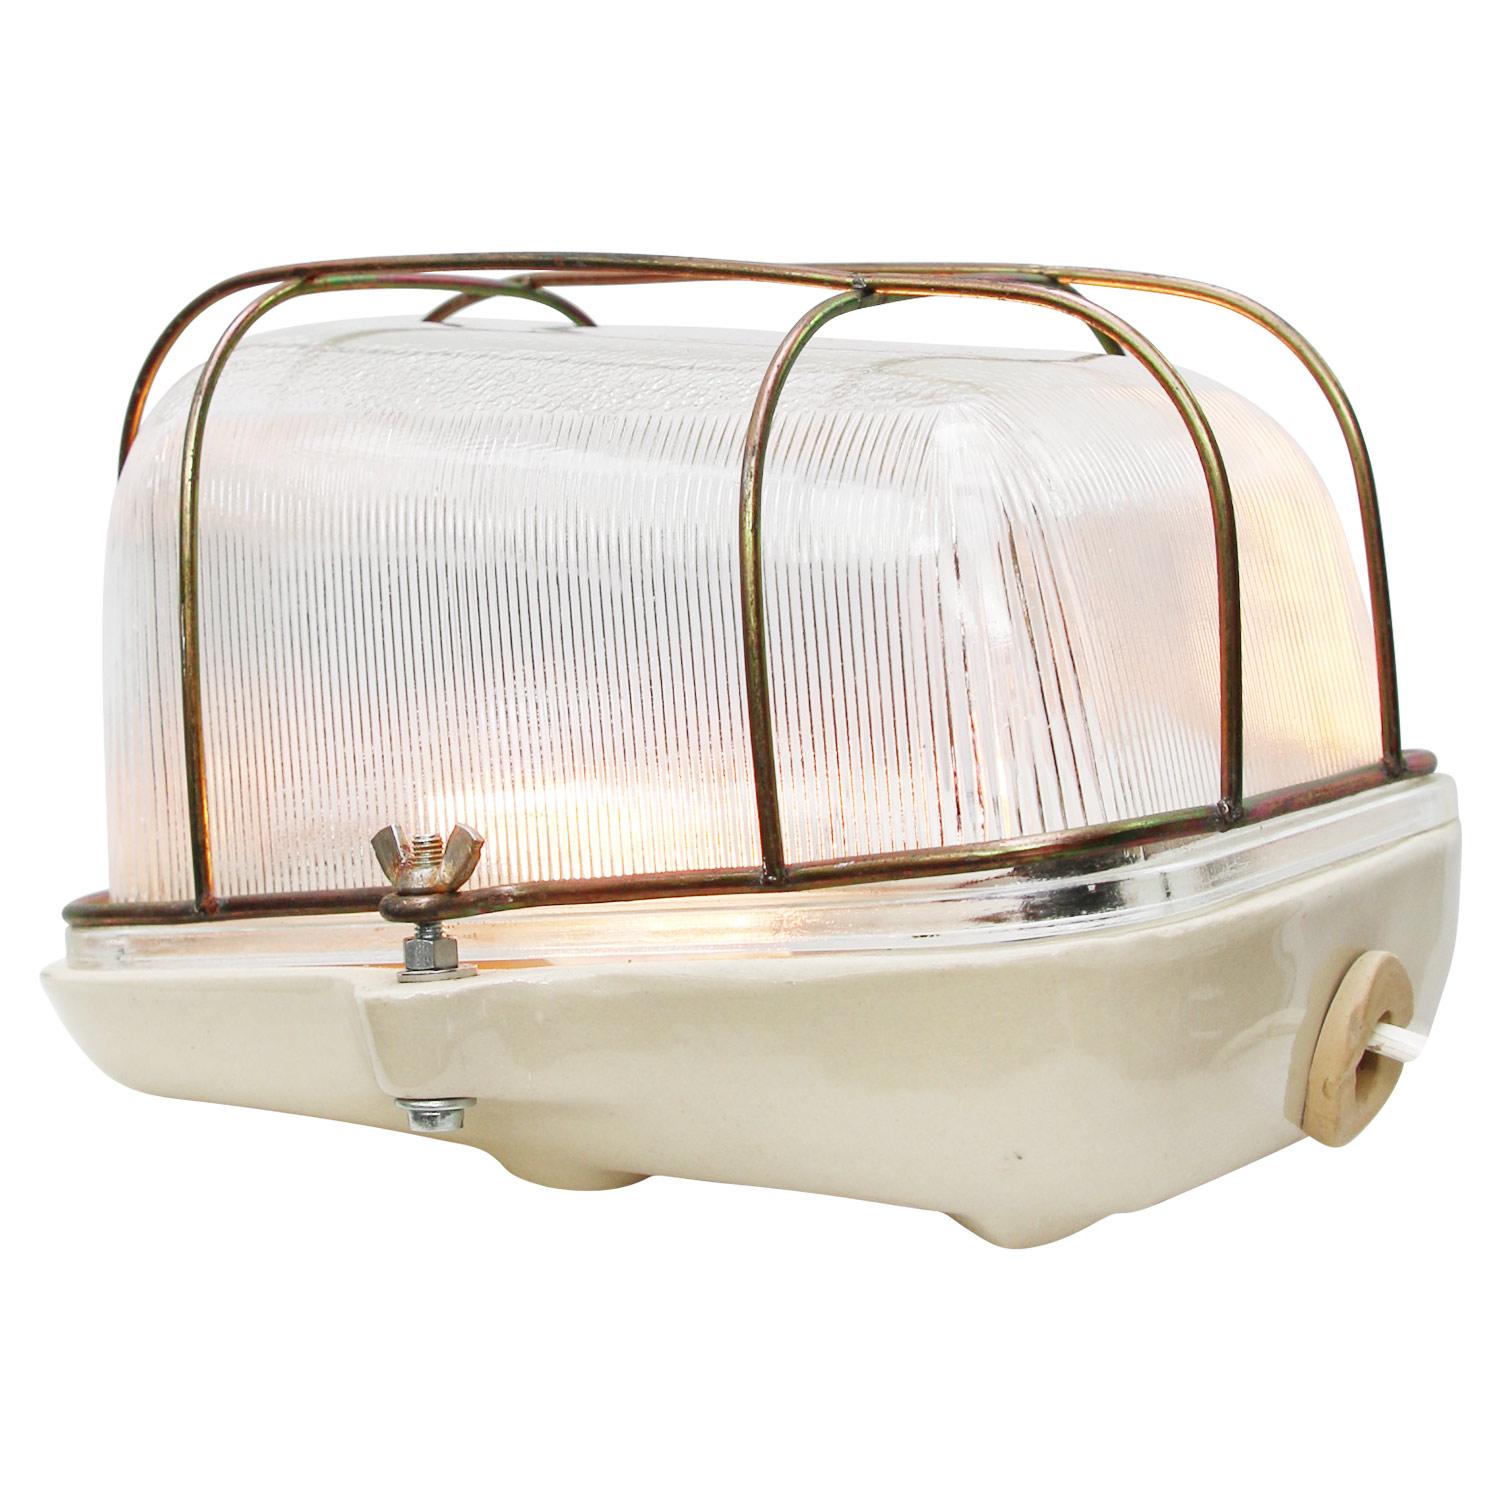 Industrial scone wall lamp, ceiling lamp, flush mount
Porcelain with striped clear glass

Not for use in the rain.

Weight: 2.00 kg / 4.4 lb

Priced per individual item. All lamps have been made suitable by international standards for